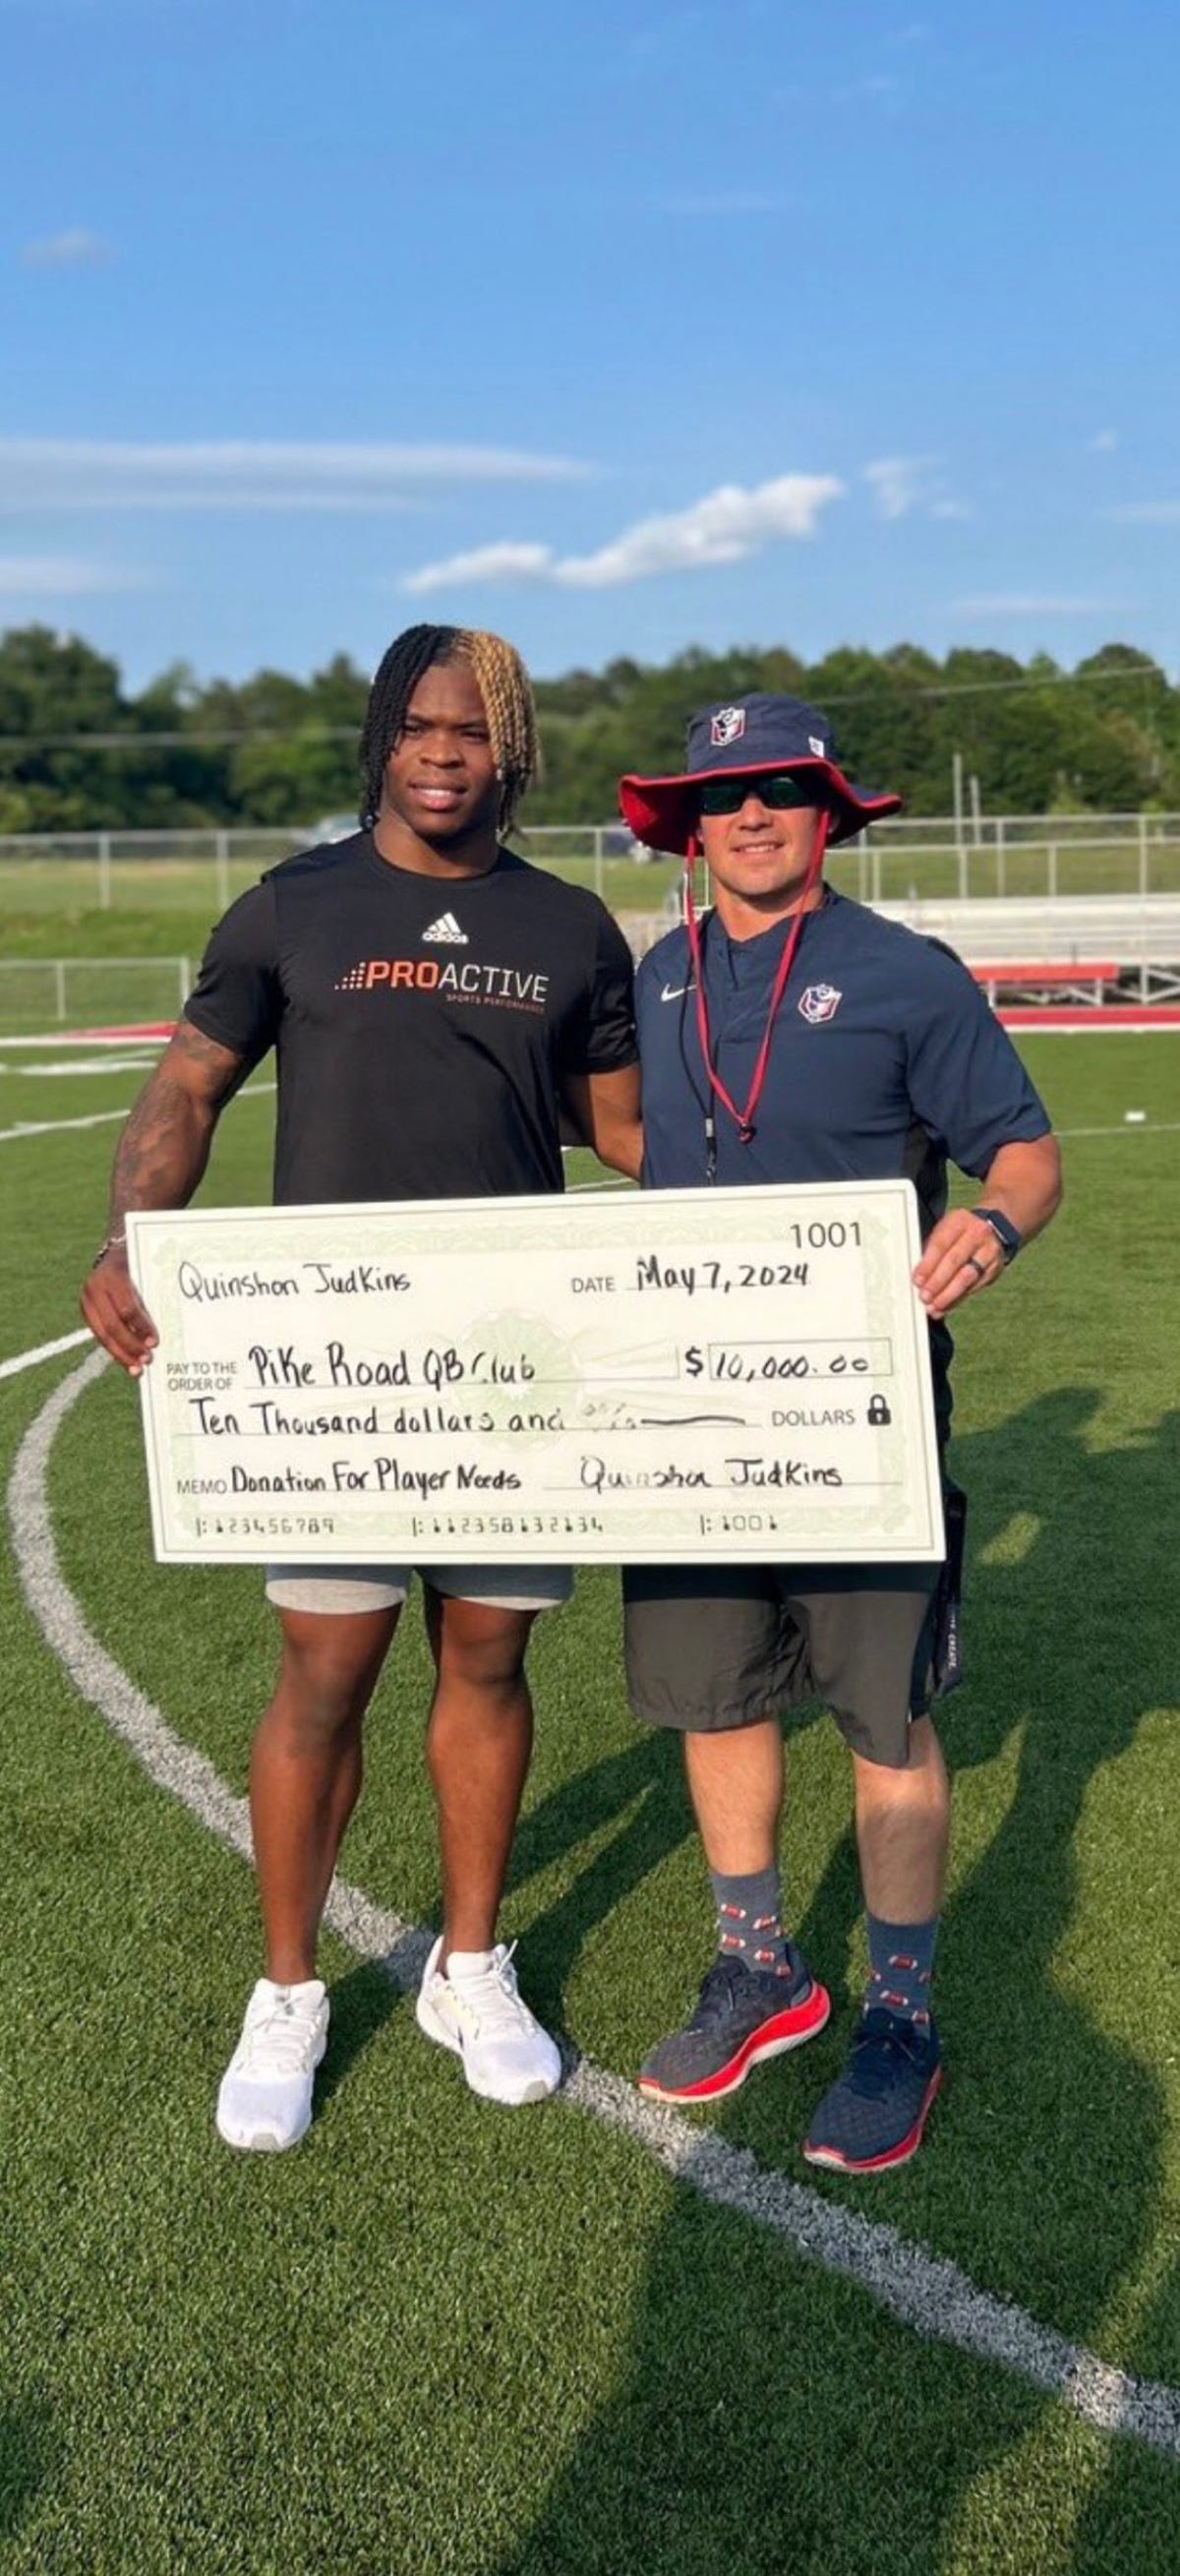 Ohio State Running Back Quinshon Judkins Donates $10,000, Inspires Pike Road Football Team